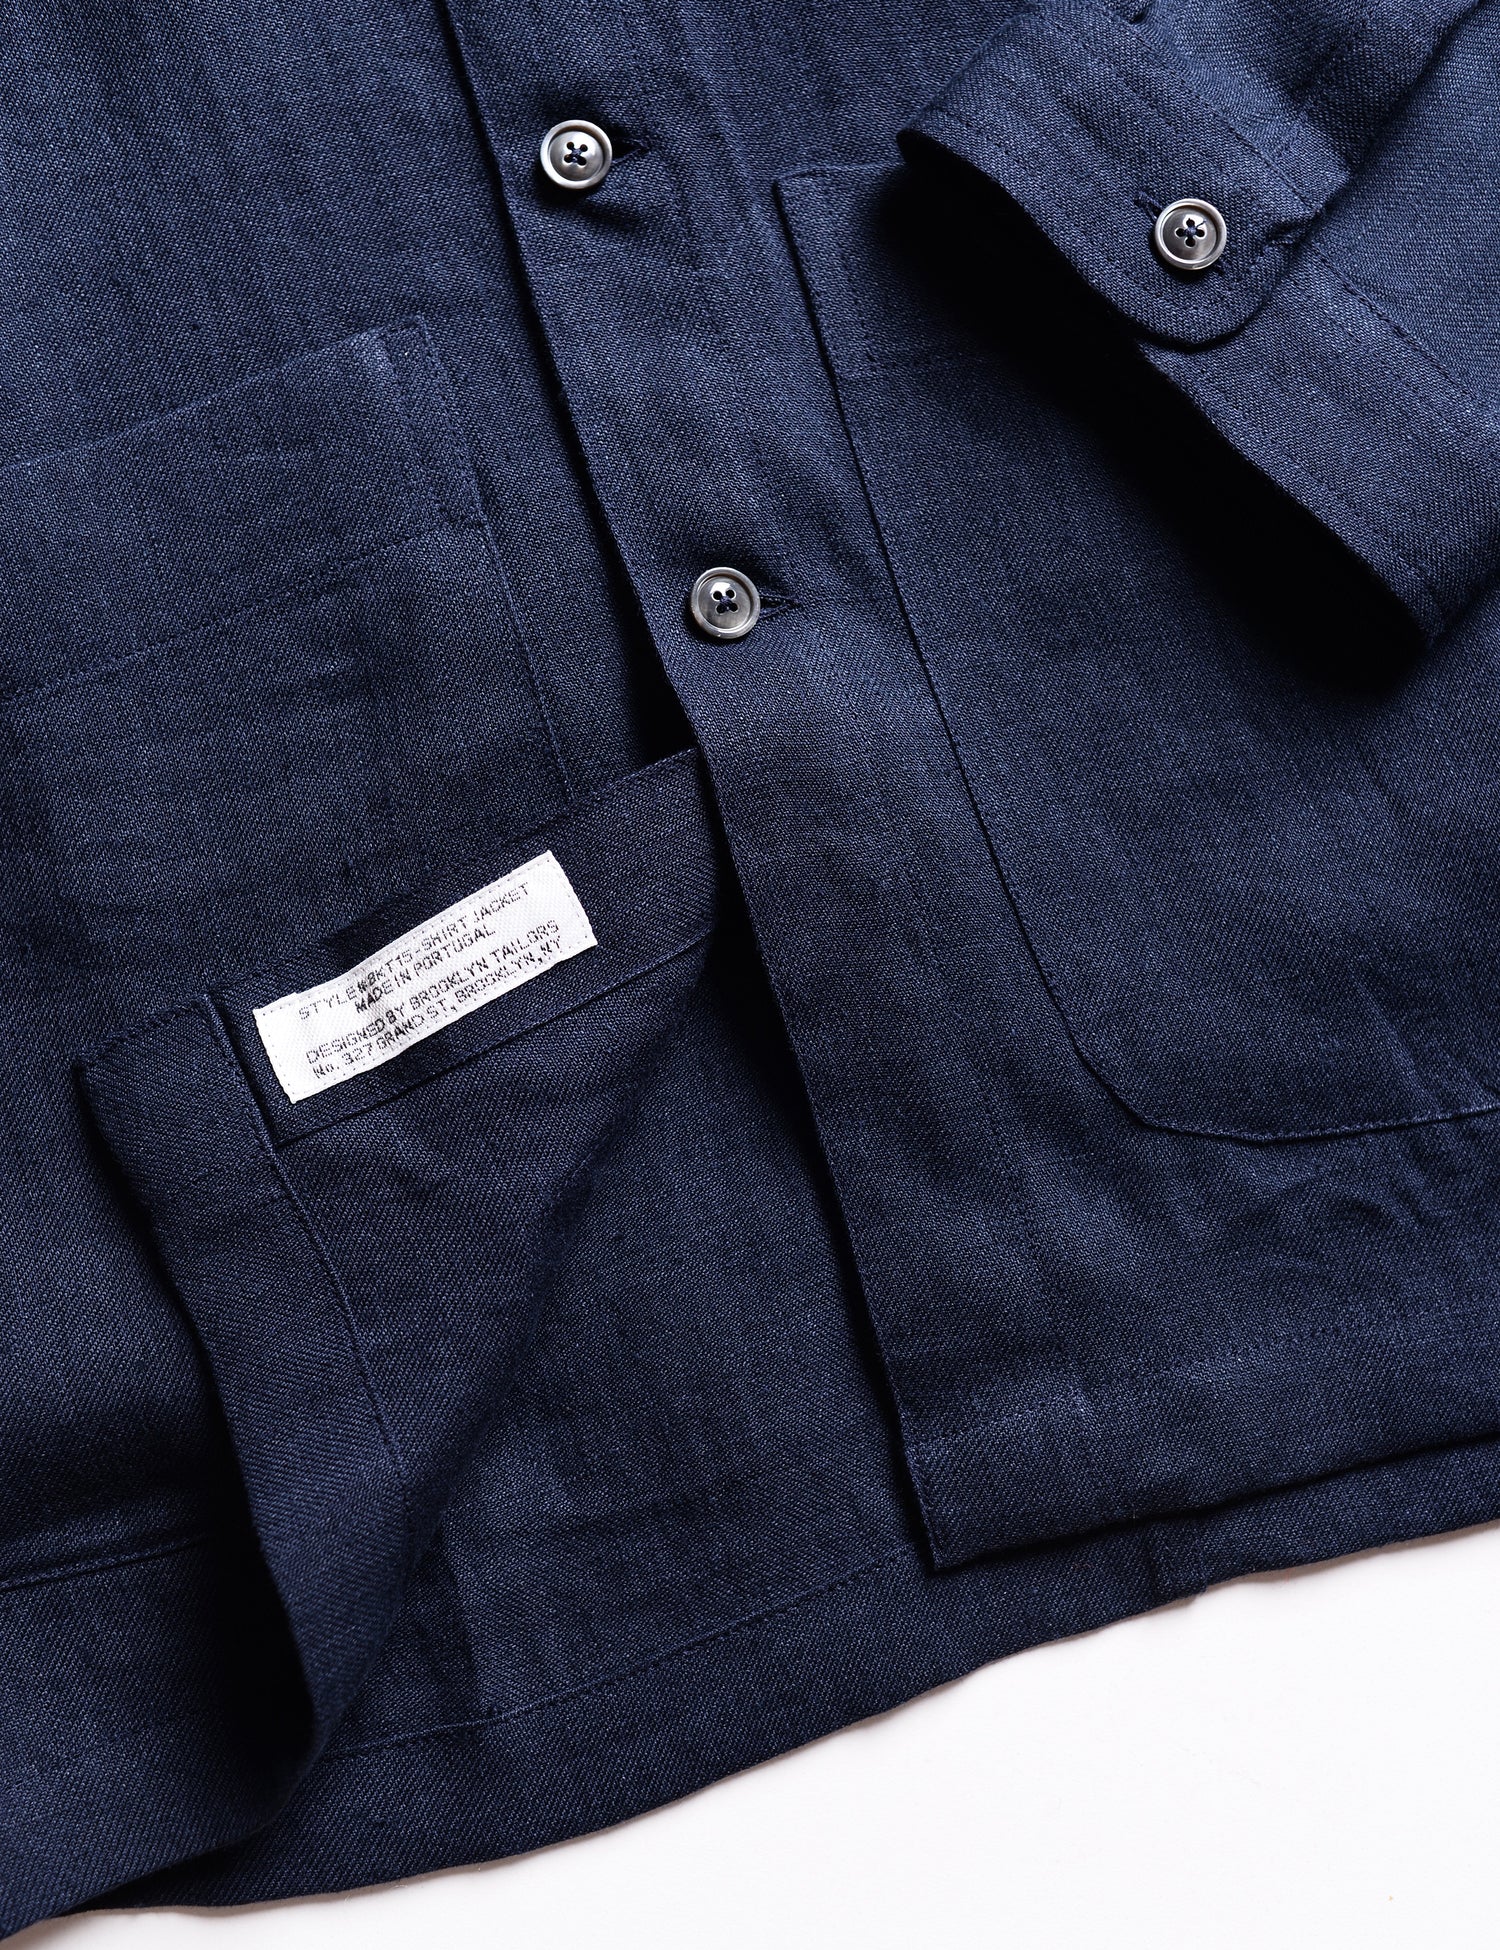 Detail shot of hem and interior labeling of Brooklyn Tailors BKT15 Shirt Jacket in Linen Twill - Salerno Blue